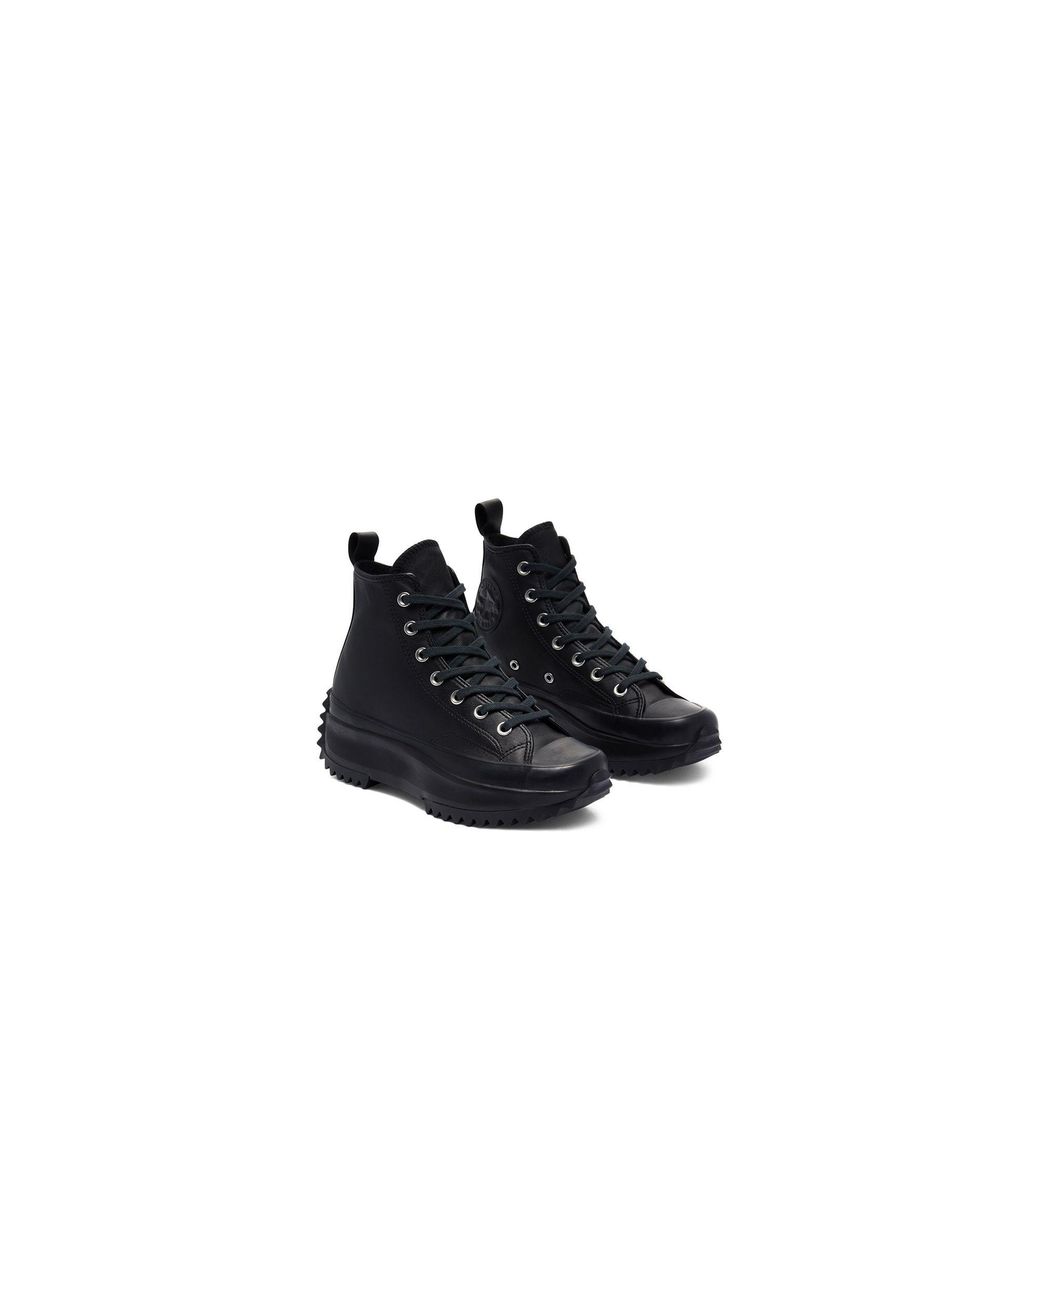 Converse Run Star Hike High Leather Sneakers in Black | Lyst UK